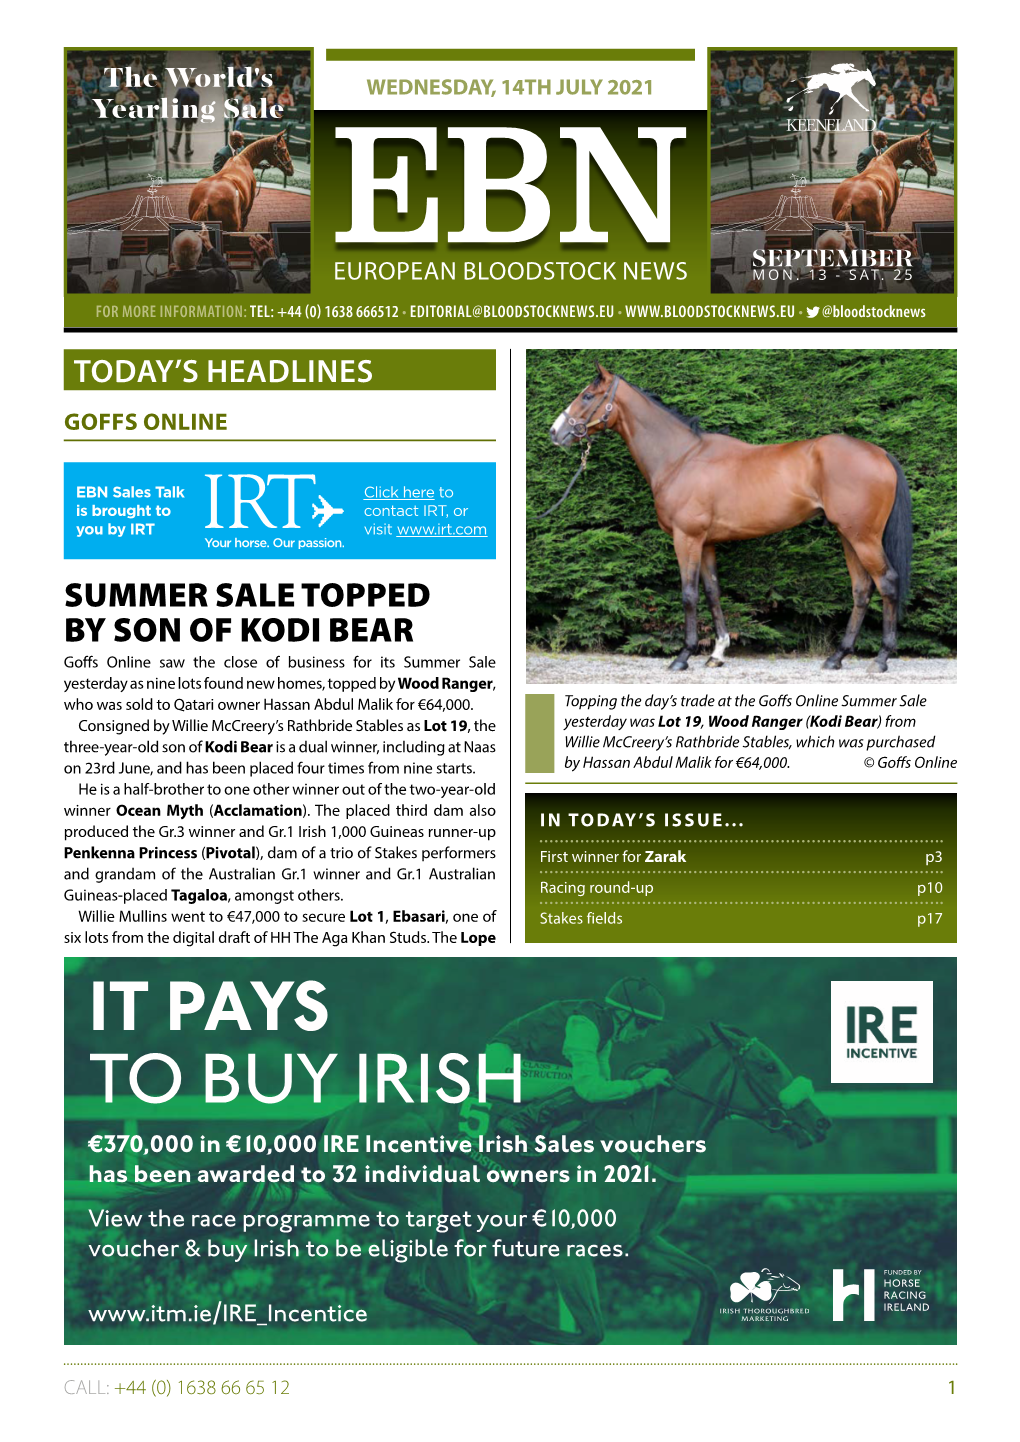 IT PAYS to BUY IRISH €370,000 in €10,000 IRE Incentive Irish Sales Vouchers Has Been Awarded to 32 Individual Owners in 2021